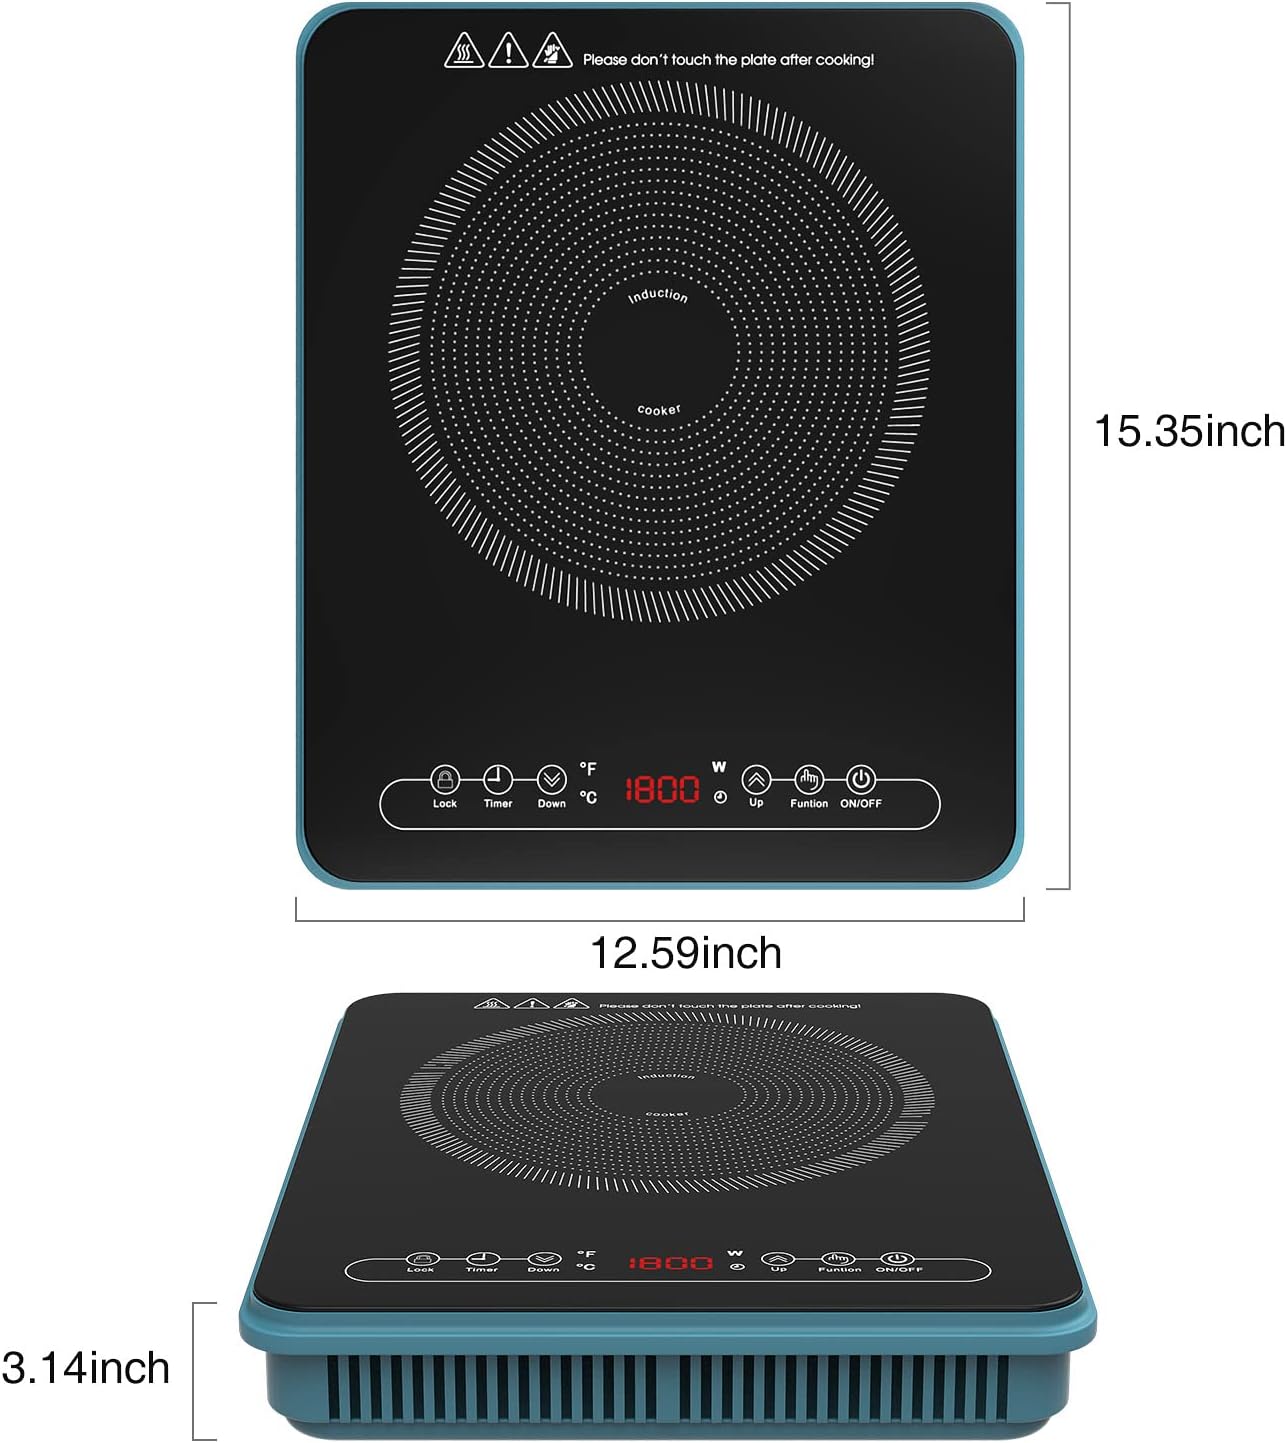 Portable Single Induction Cooktop, THREEMI 1800W Countertop Burner Hot Plate with Fast Heating Mode